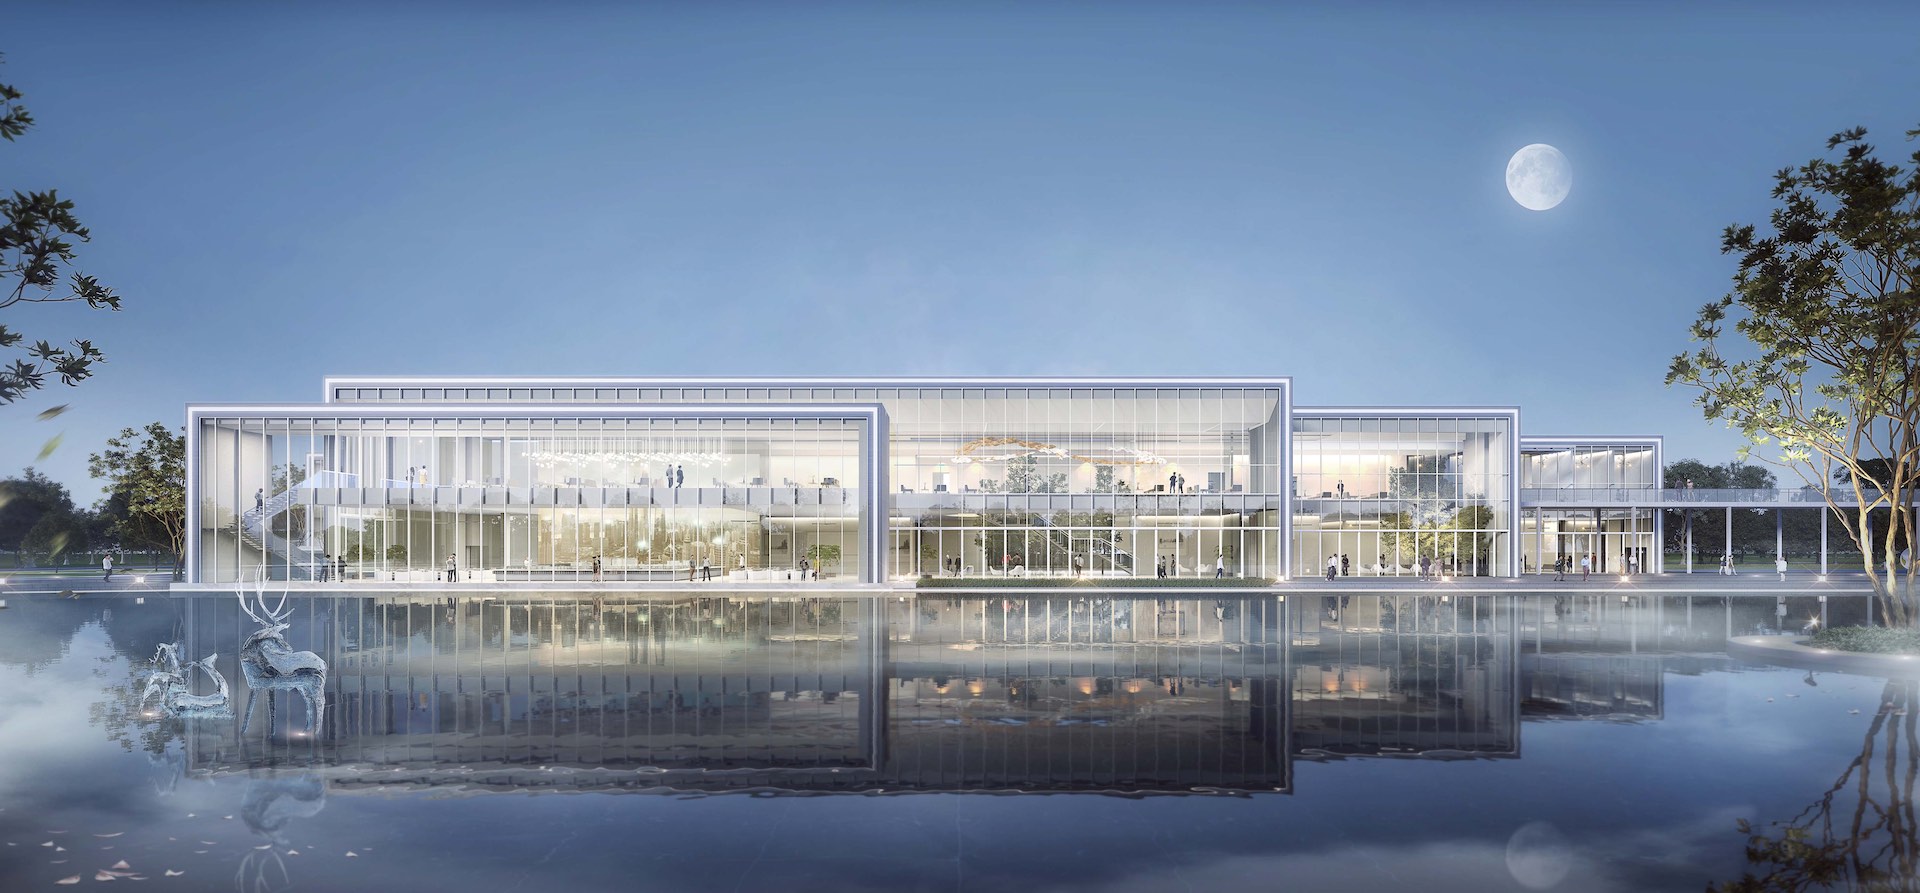 MUSE Design Winners - Tongwei Global Exhibition Center